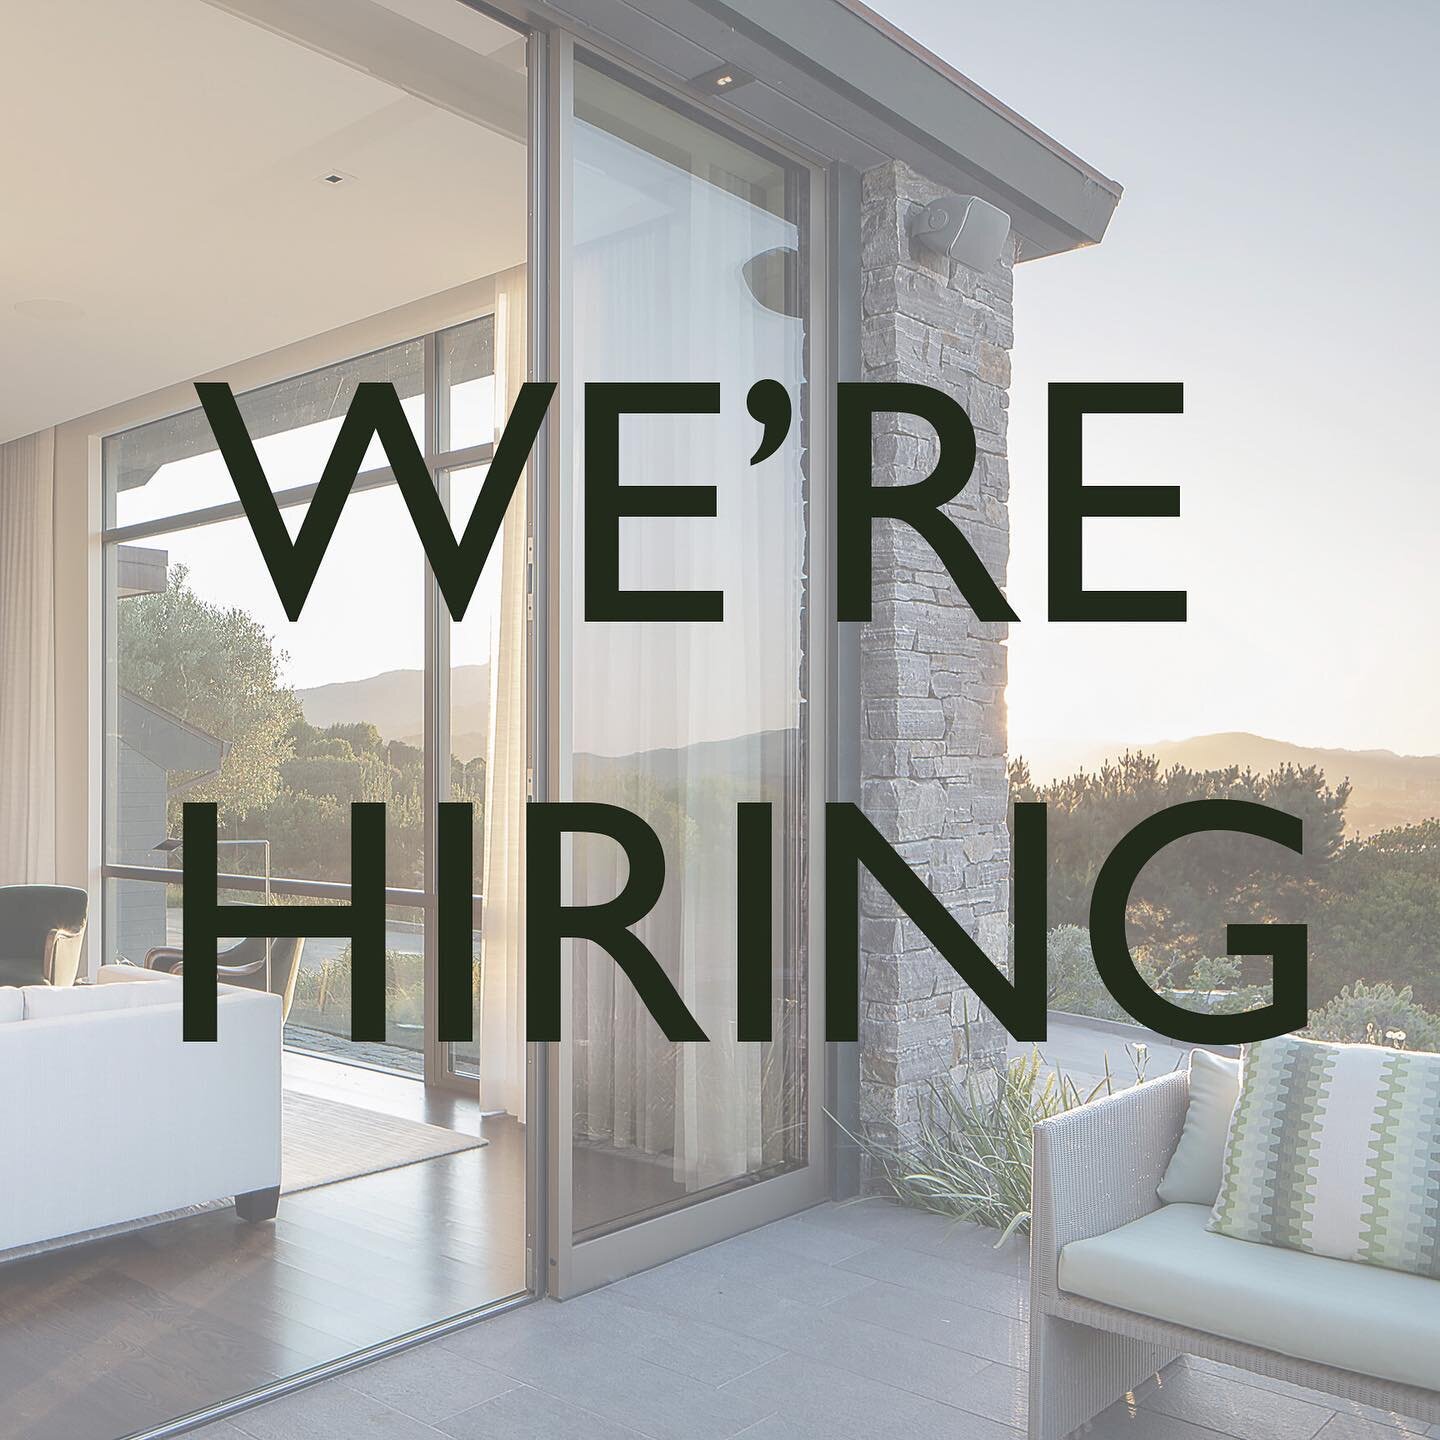 We&rsquo;re hiring! We are looking for candidates skilled in producing first rate construction documents and providing excellent construction administration. We have many exciting high-end residential projects in the works and offer competitive salar